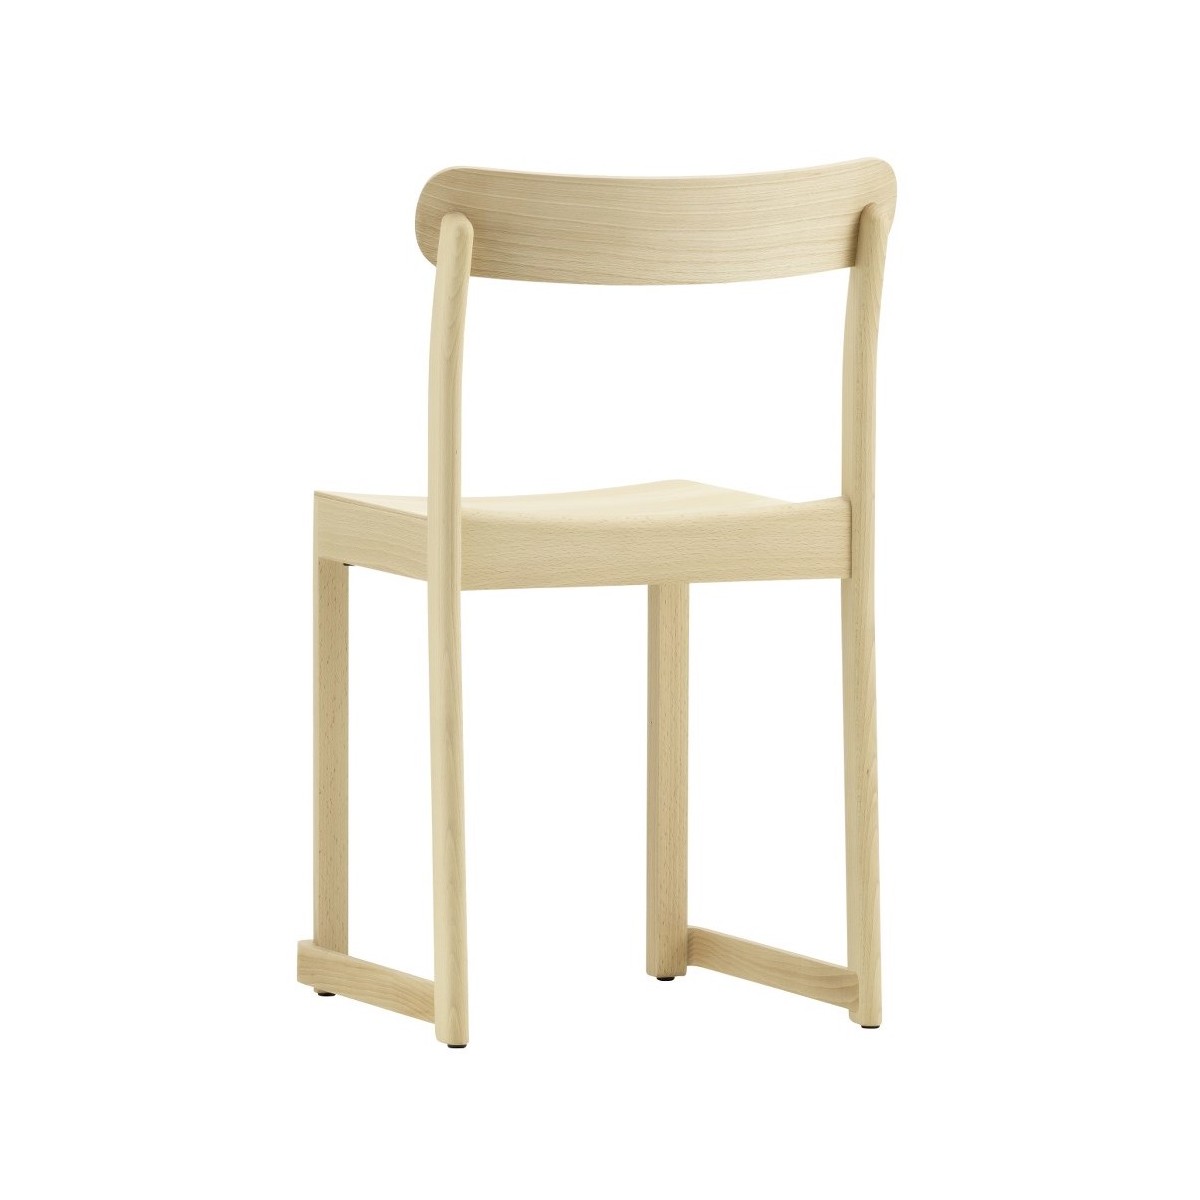 beech, lacquered - Atelier Chair